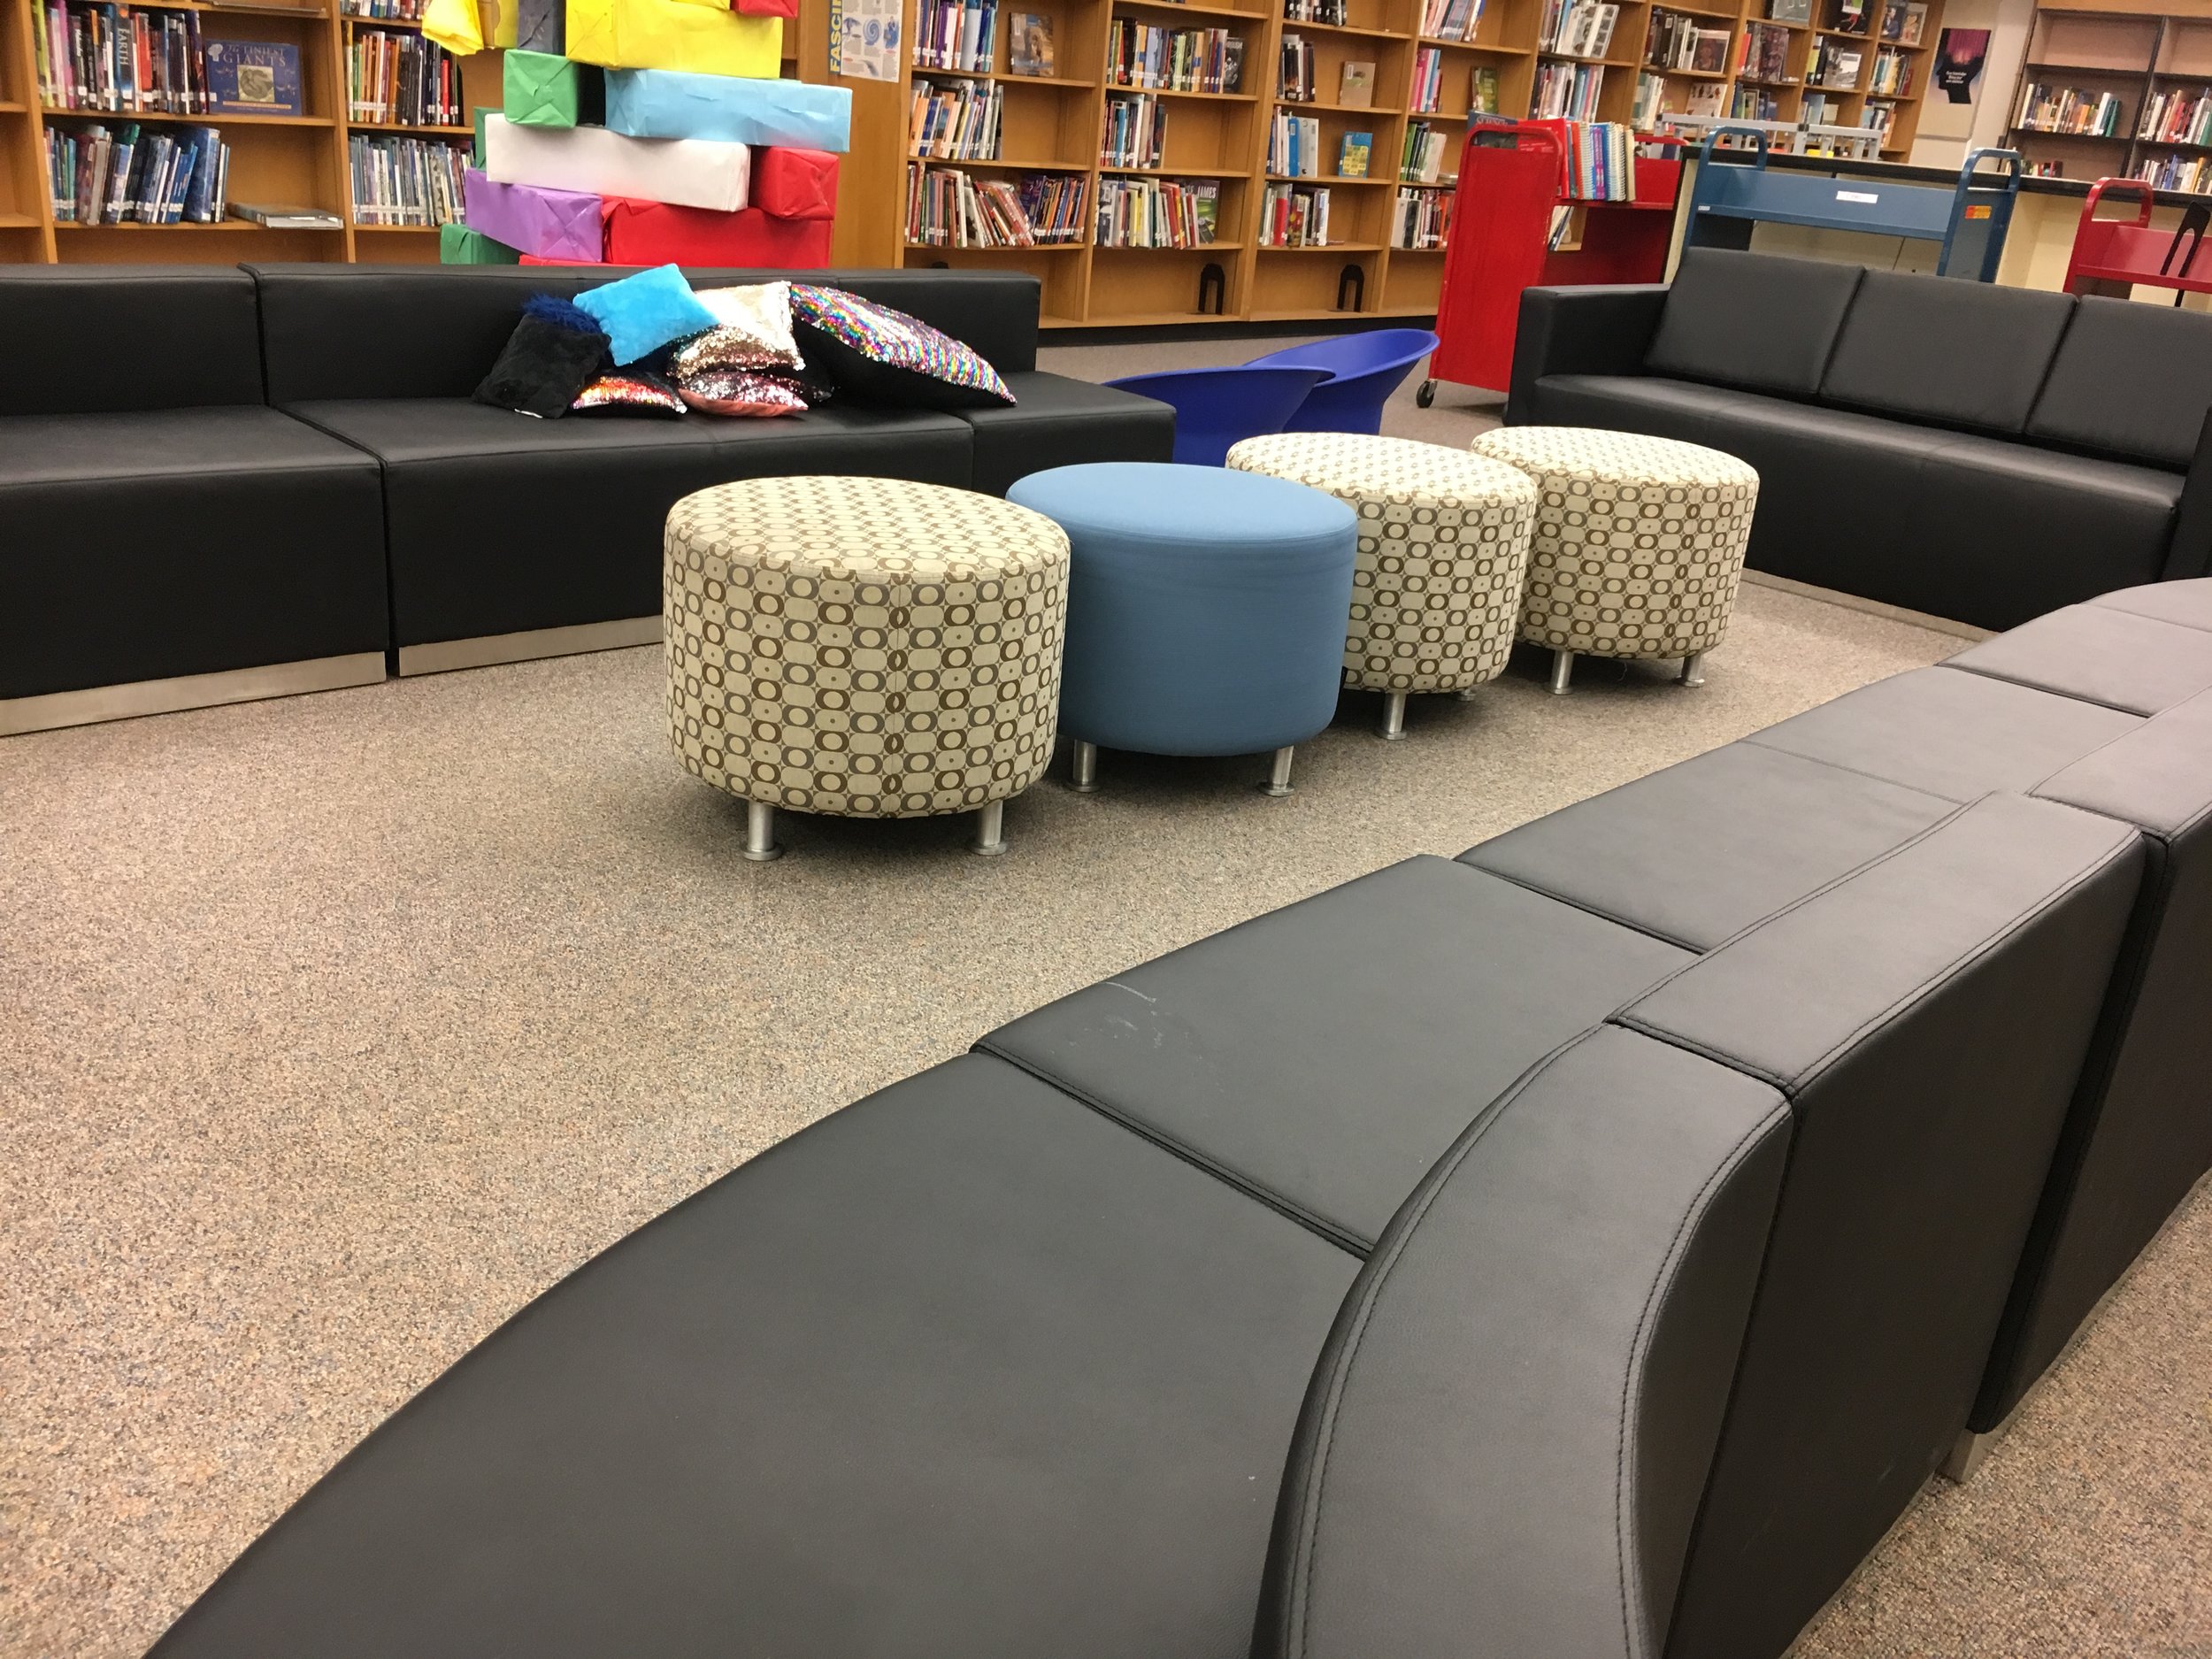 Your Money At Work Ptc Funds New Library Furniture Cedar